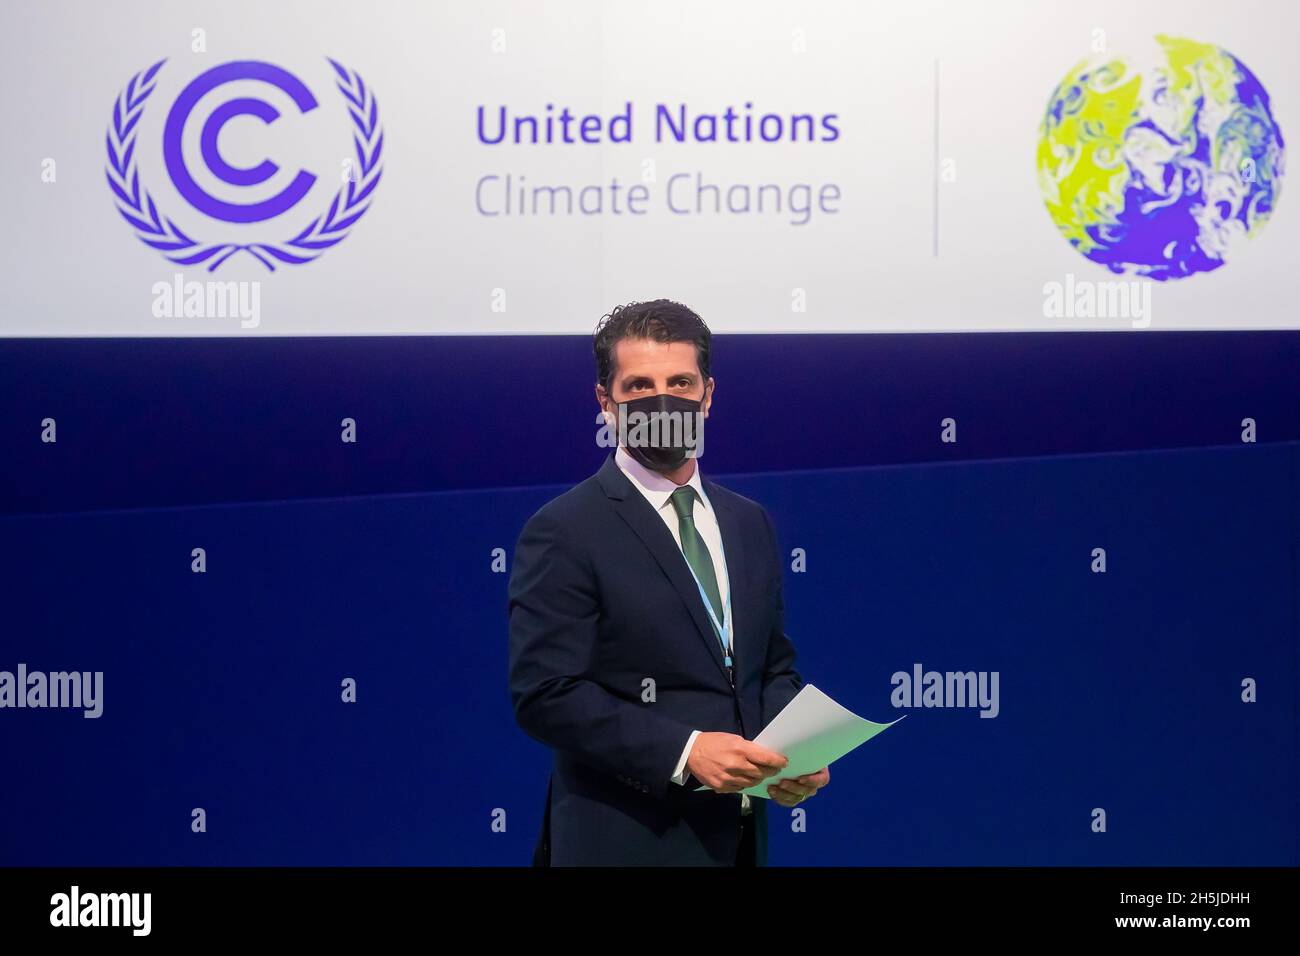 Glasgow, UK. 10th Nov, 2021. Joaquim Alvaro Pereira Leite, Minister of Environment of Brazil, waits before his speech at the UN Climate Change Conference COP26 in Glasgow. For two weeks in Glasgow, some 200 countries are wrestling with how the goal of limiting global warming to 1.5 degrees compared to pre-industrial times, if possible, can still be achieved. Credit: Christoph Soeder/dpa/Alamy Live News Stock Photo